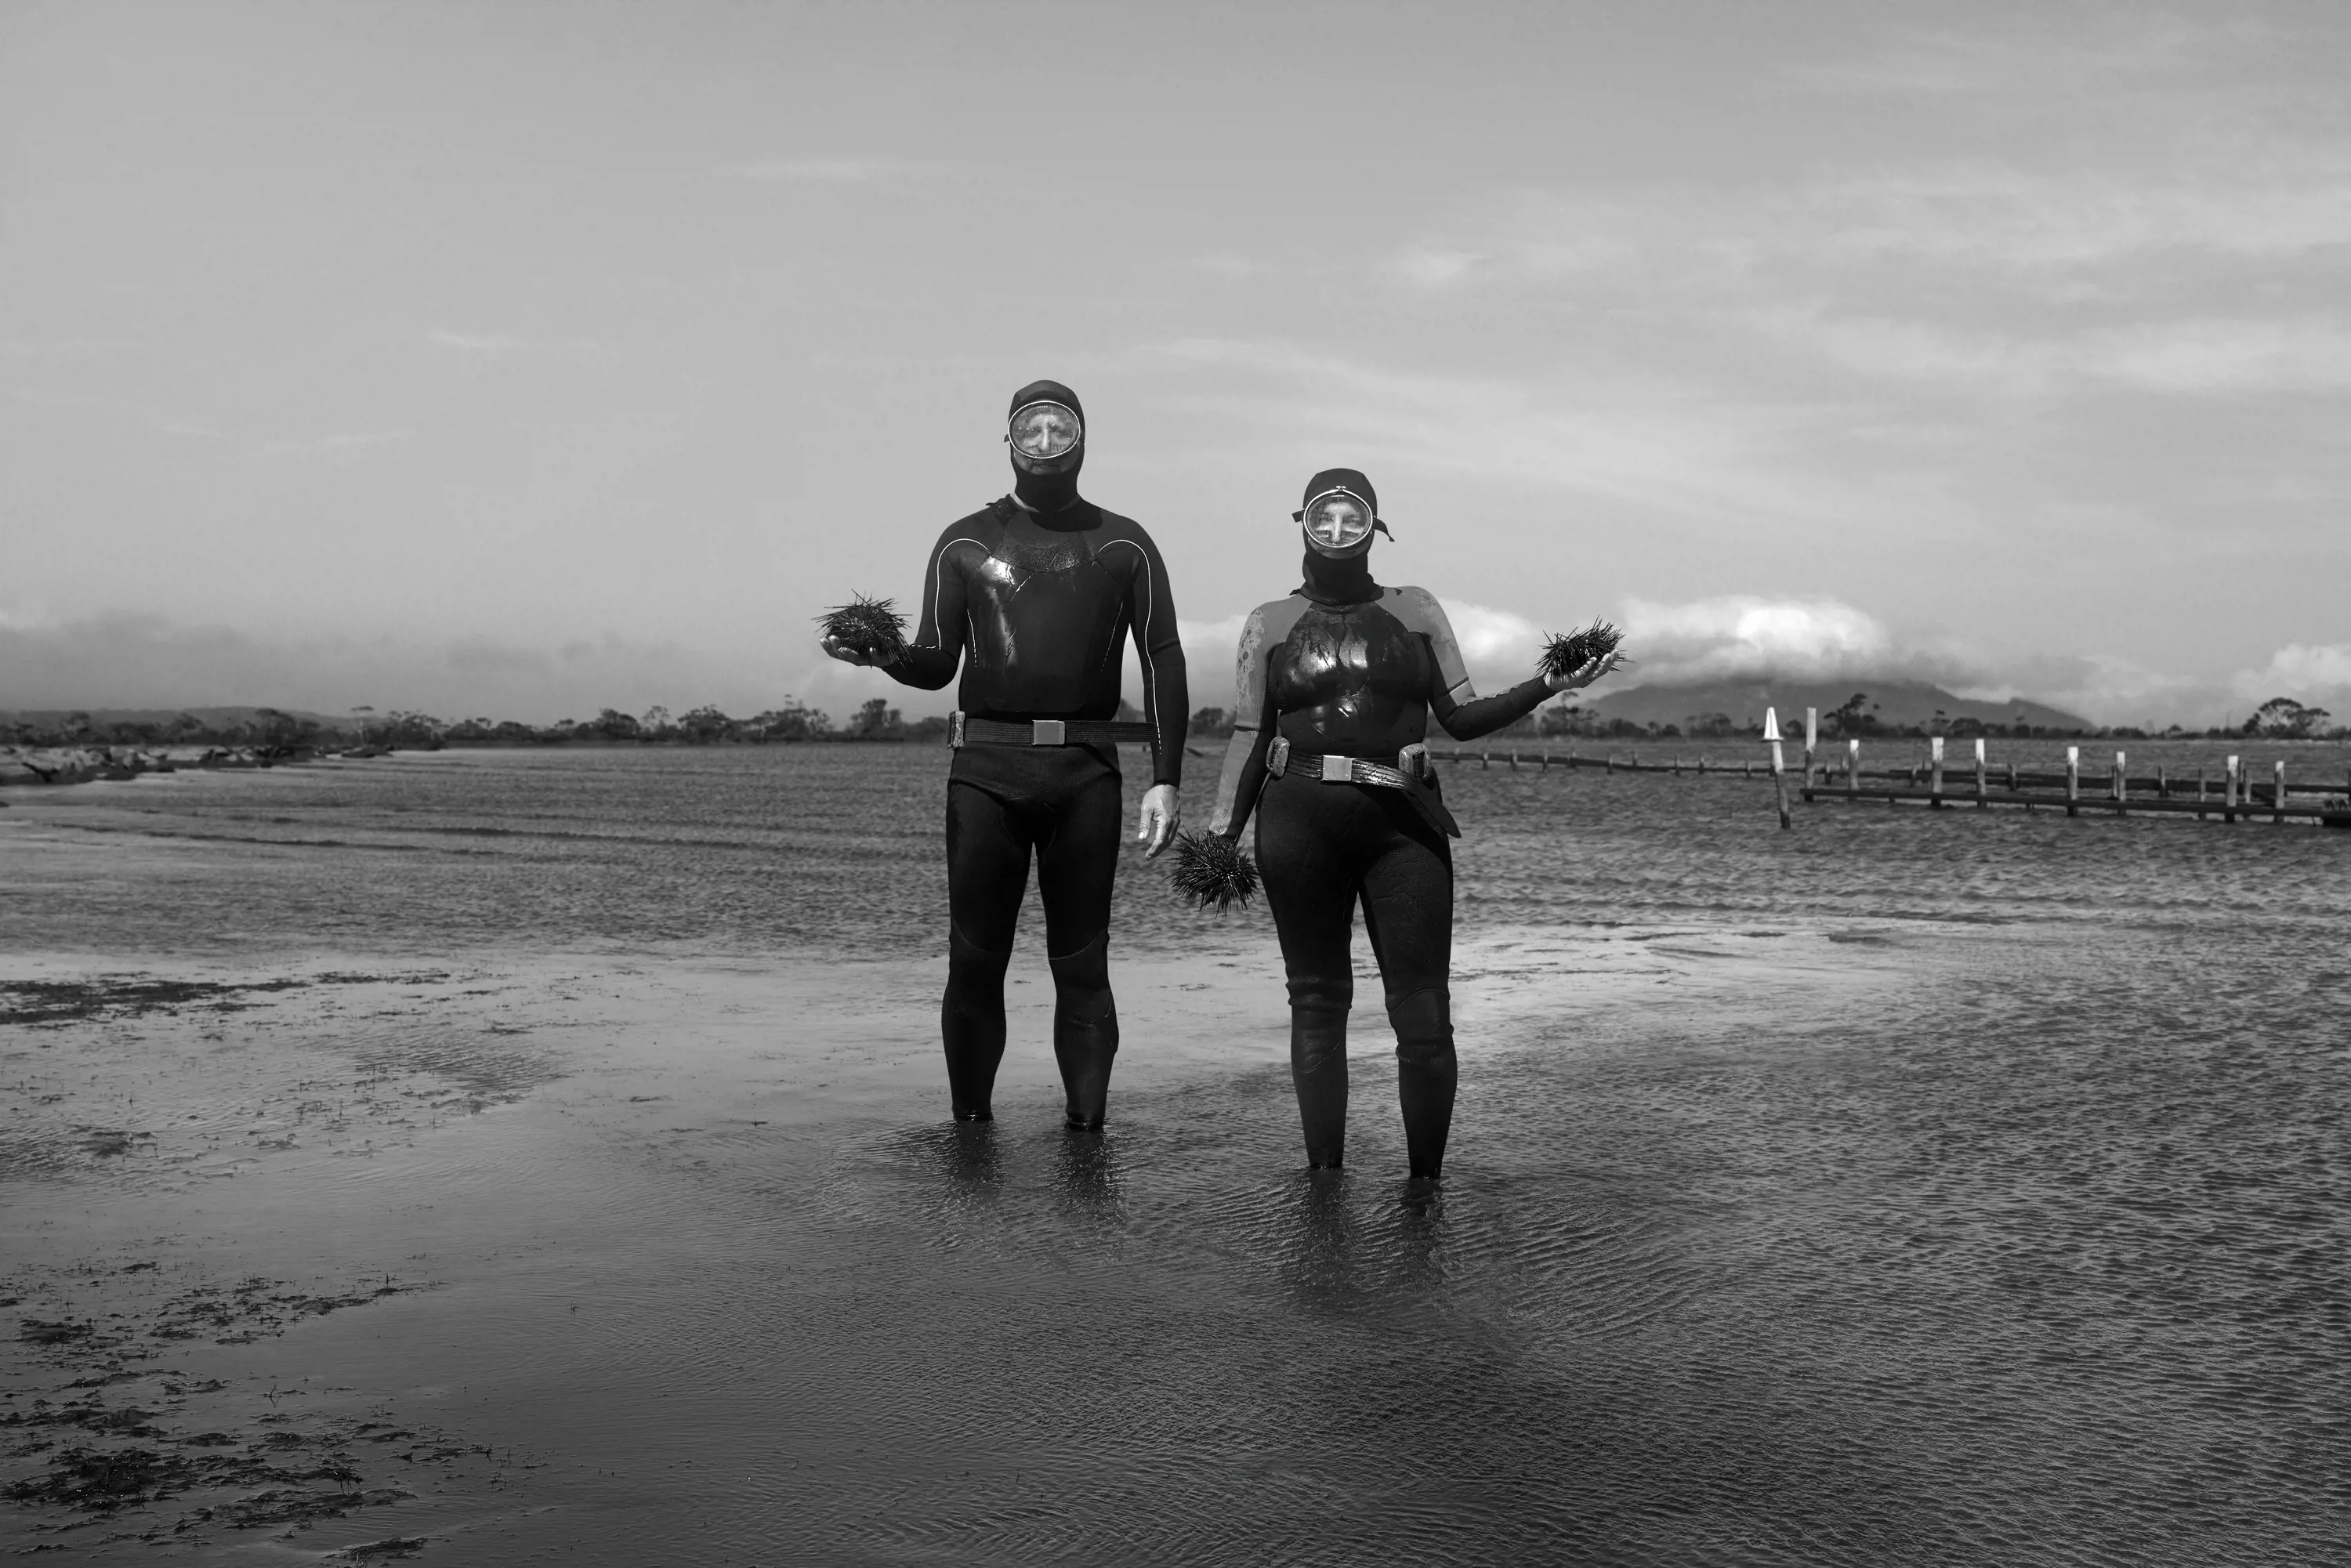 Two people wearing full-body wetsuits and snorkelling masks stand in shallow water, holding sea urchins.